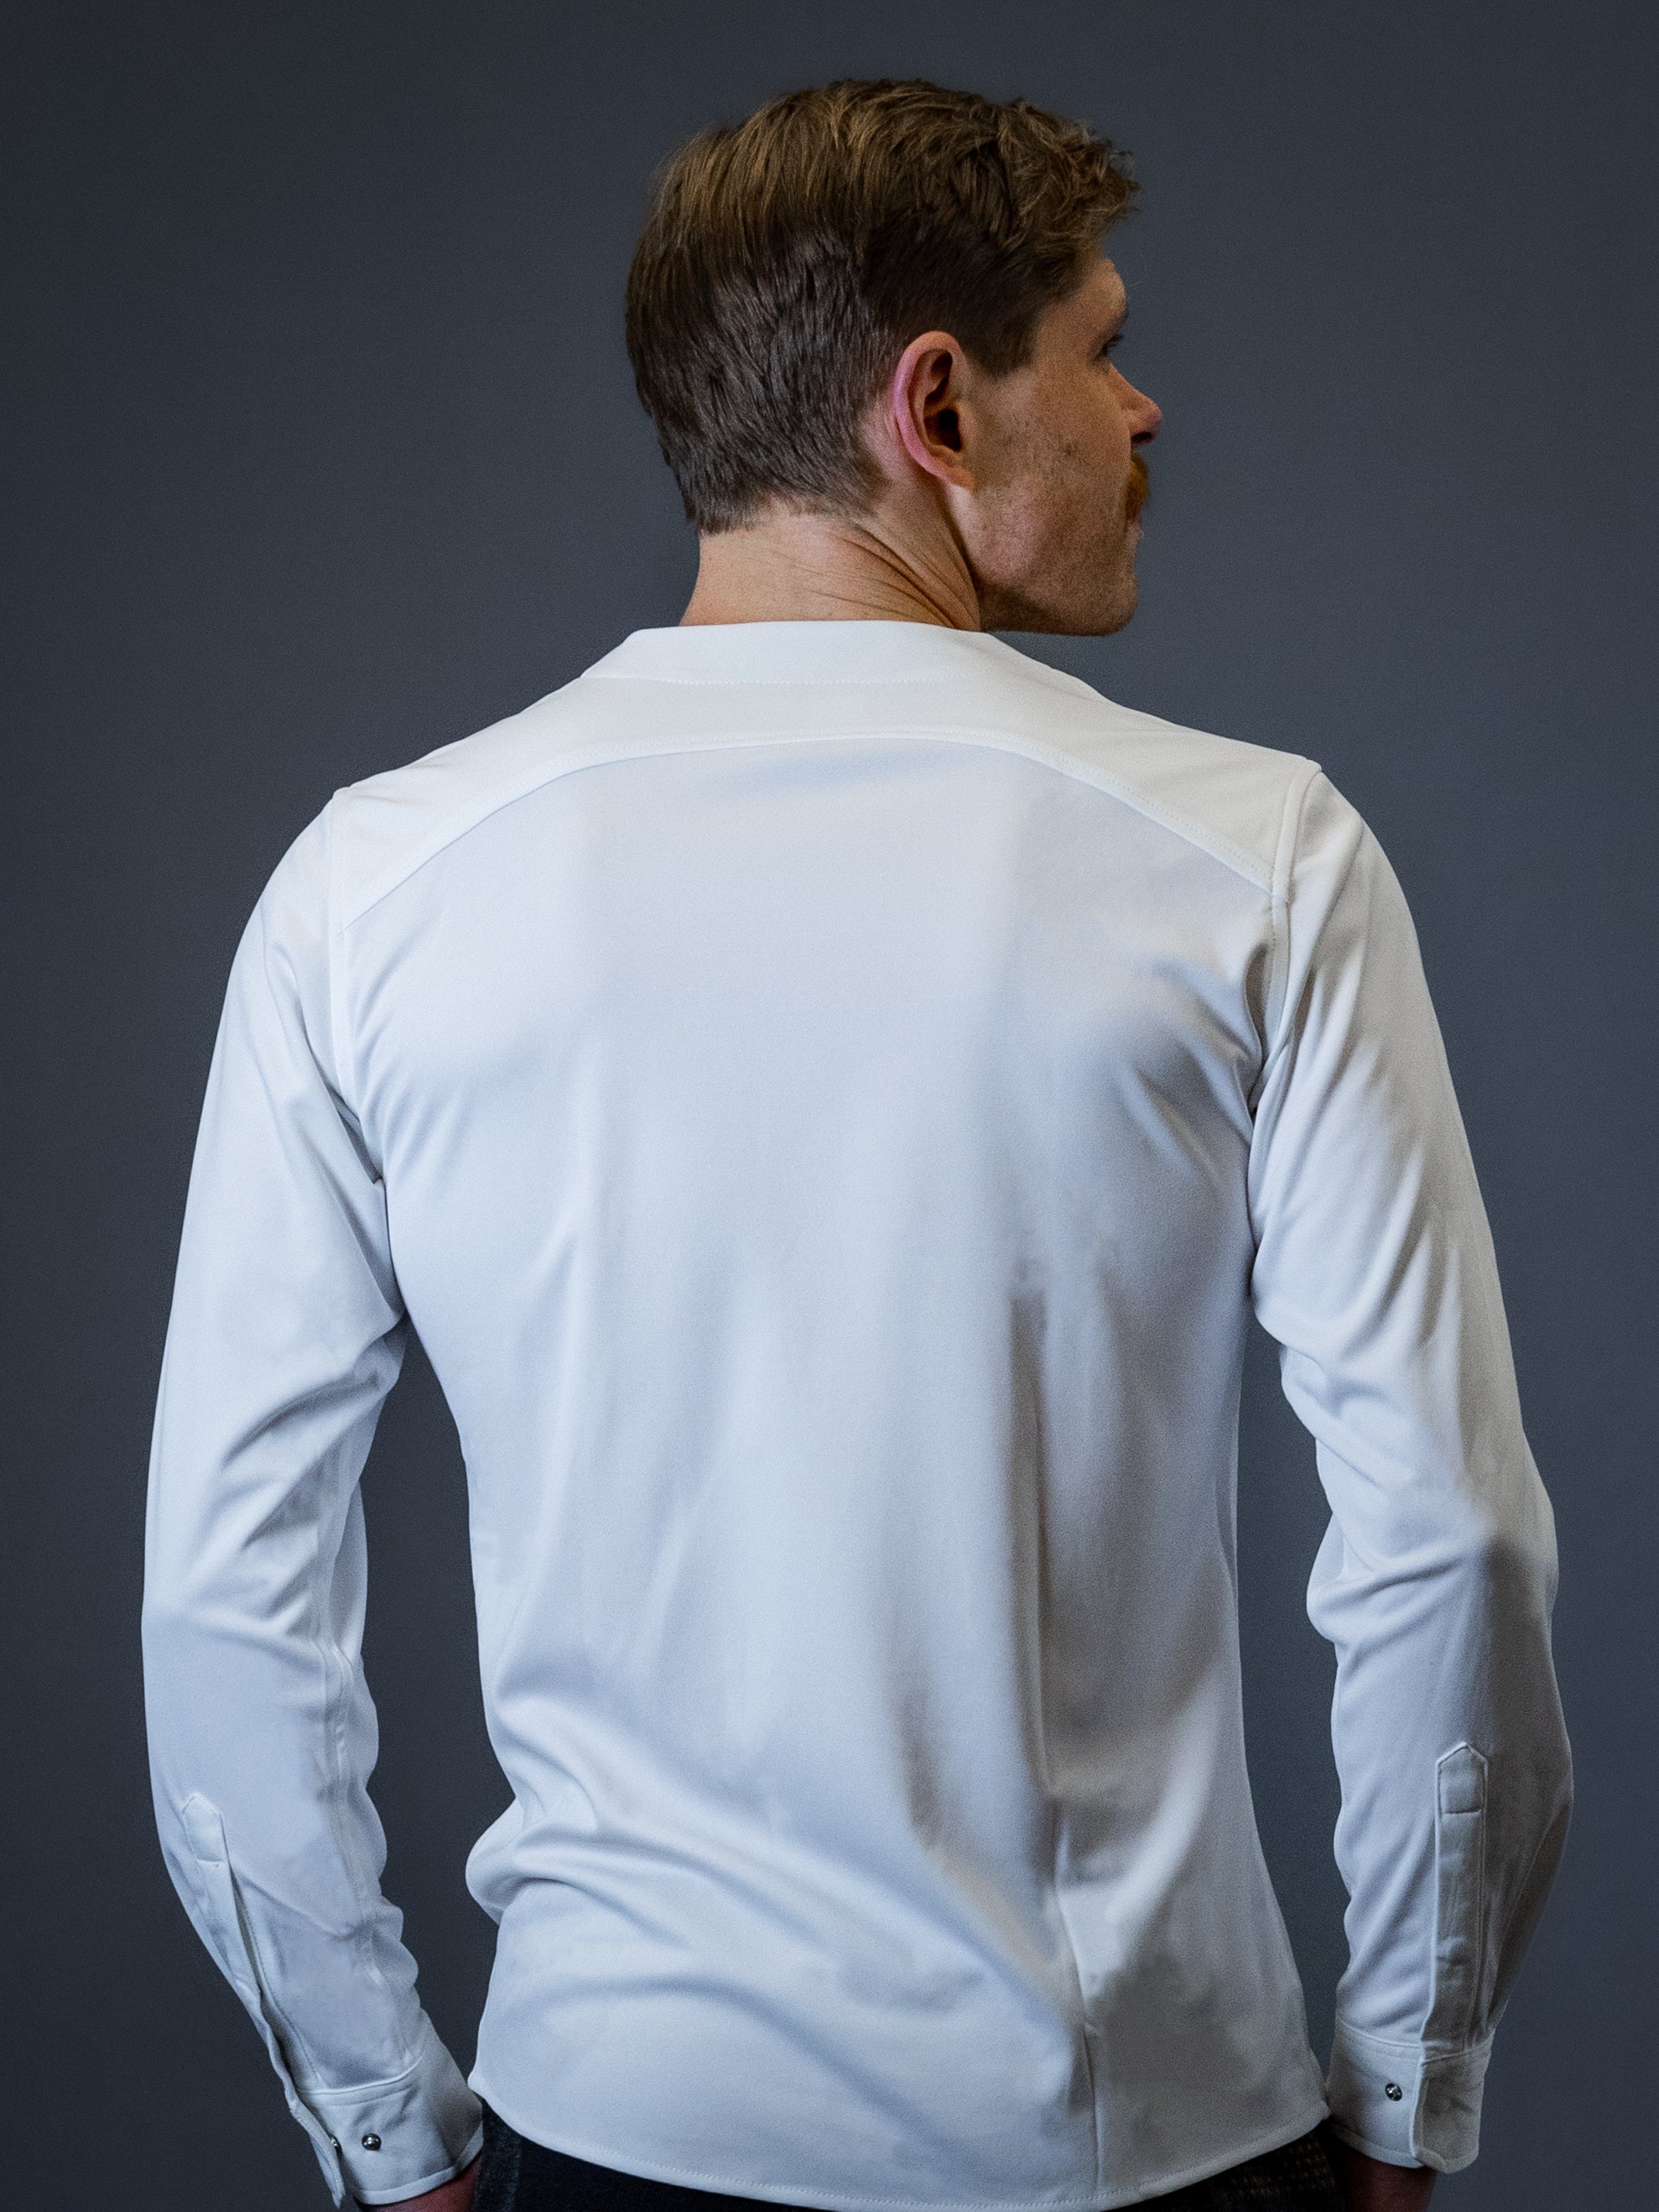 Man showing the back of a white collarless dress shirt made by Cheegs Shirts